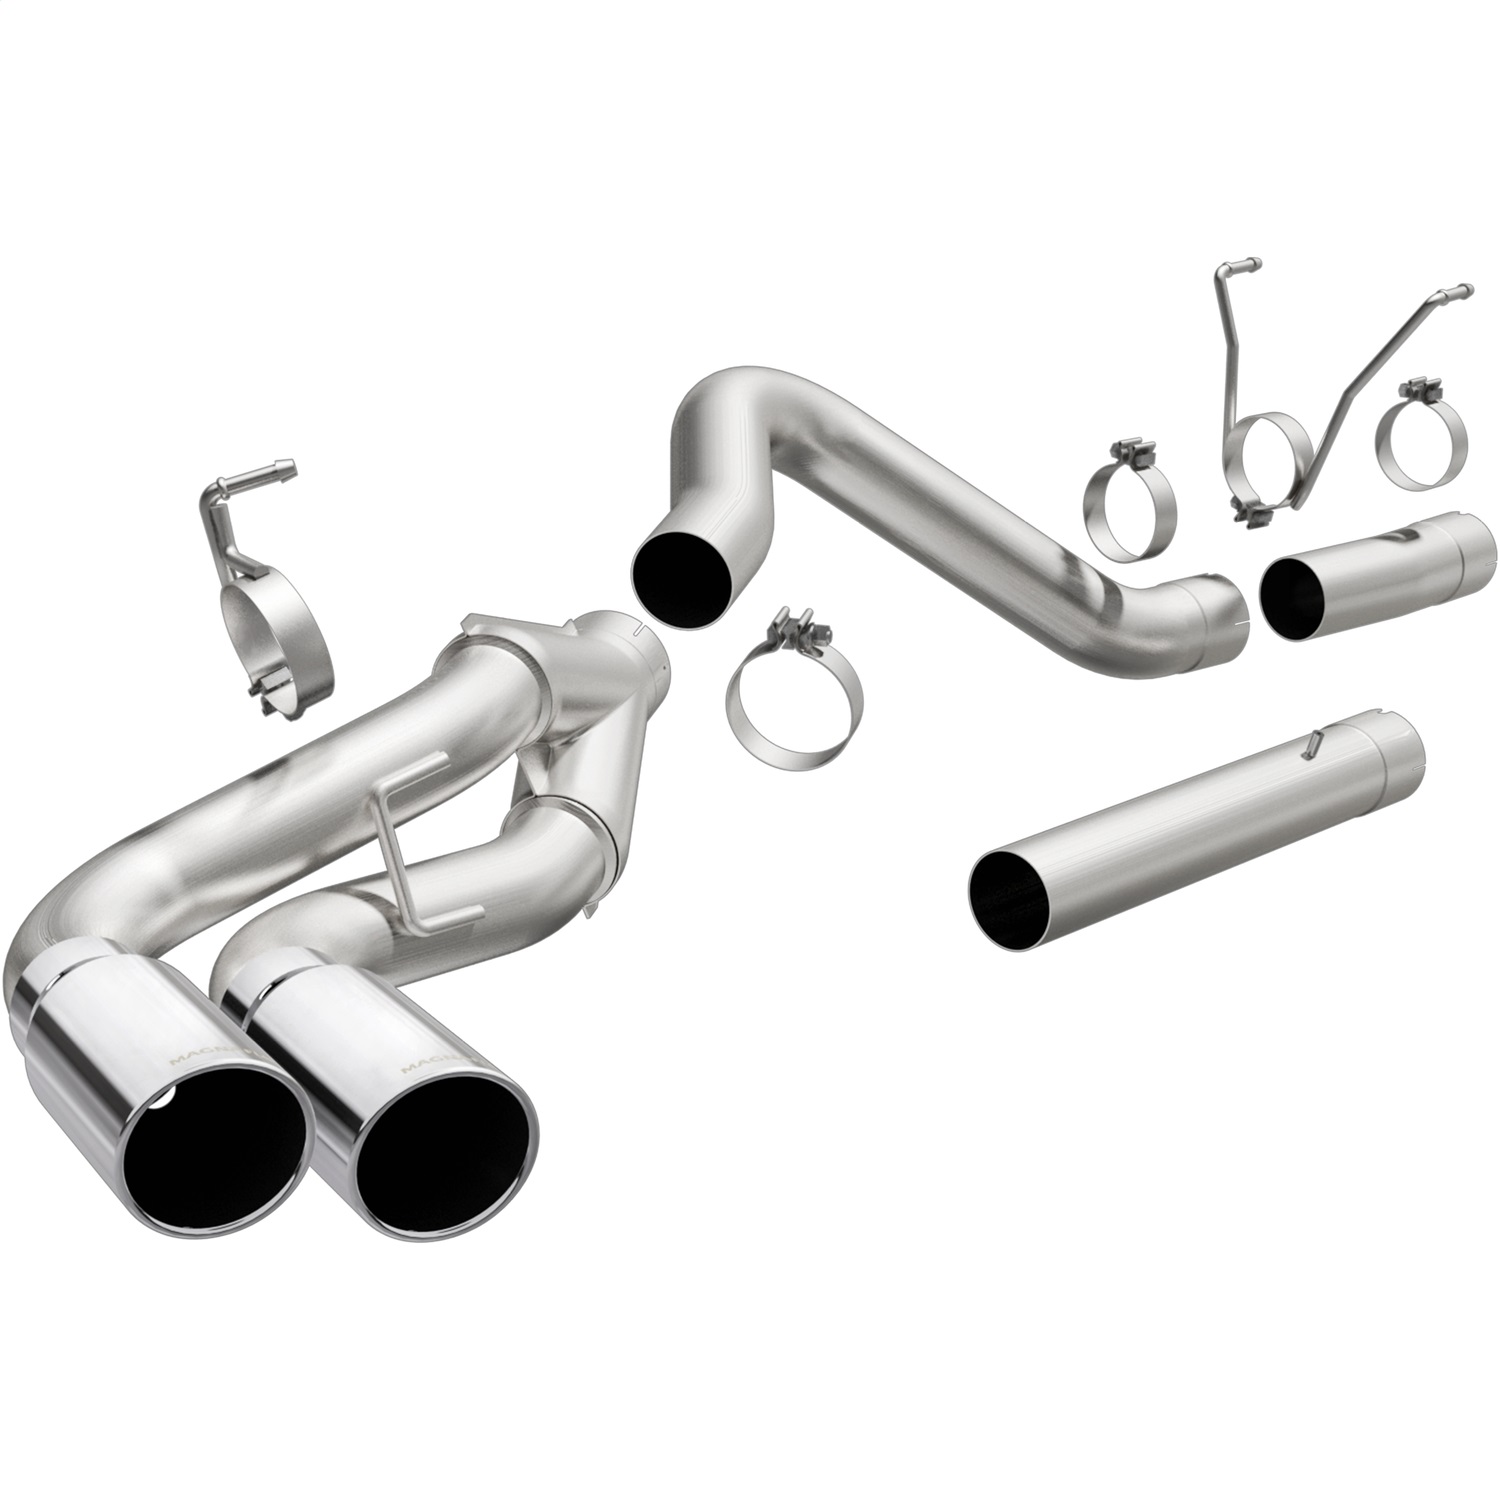 custom performance exhaust systems